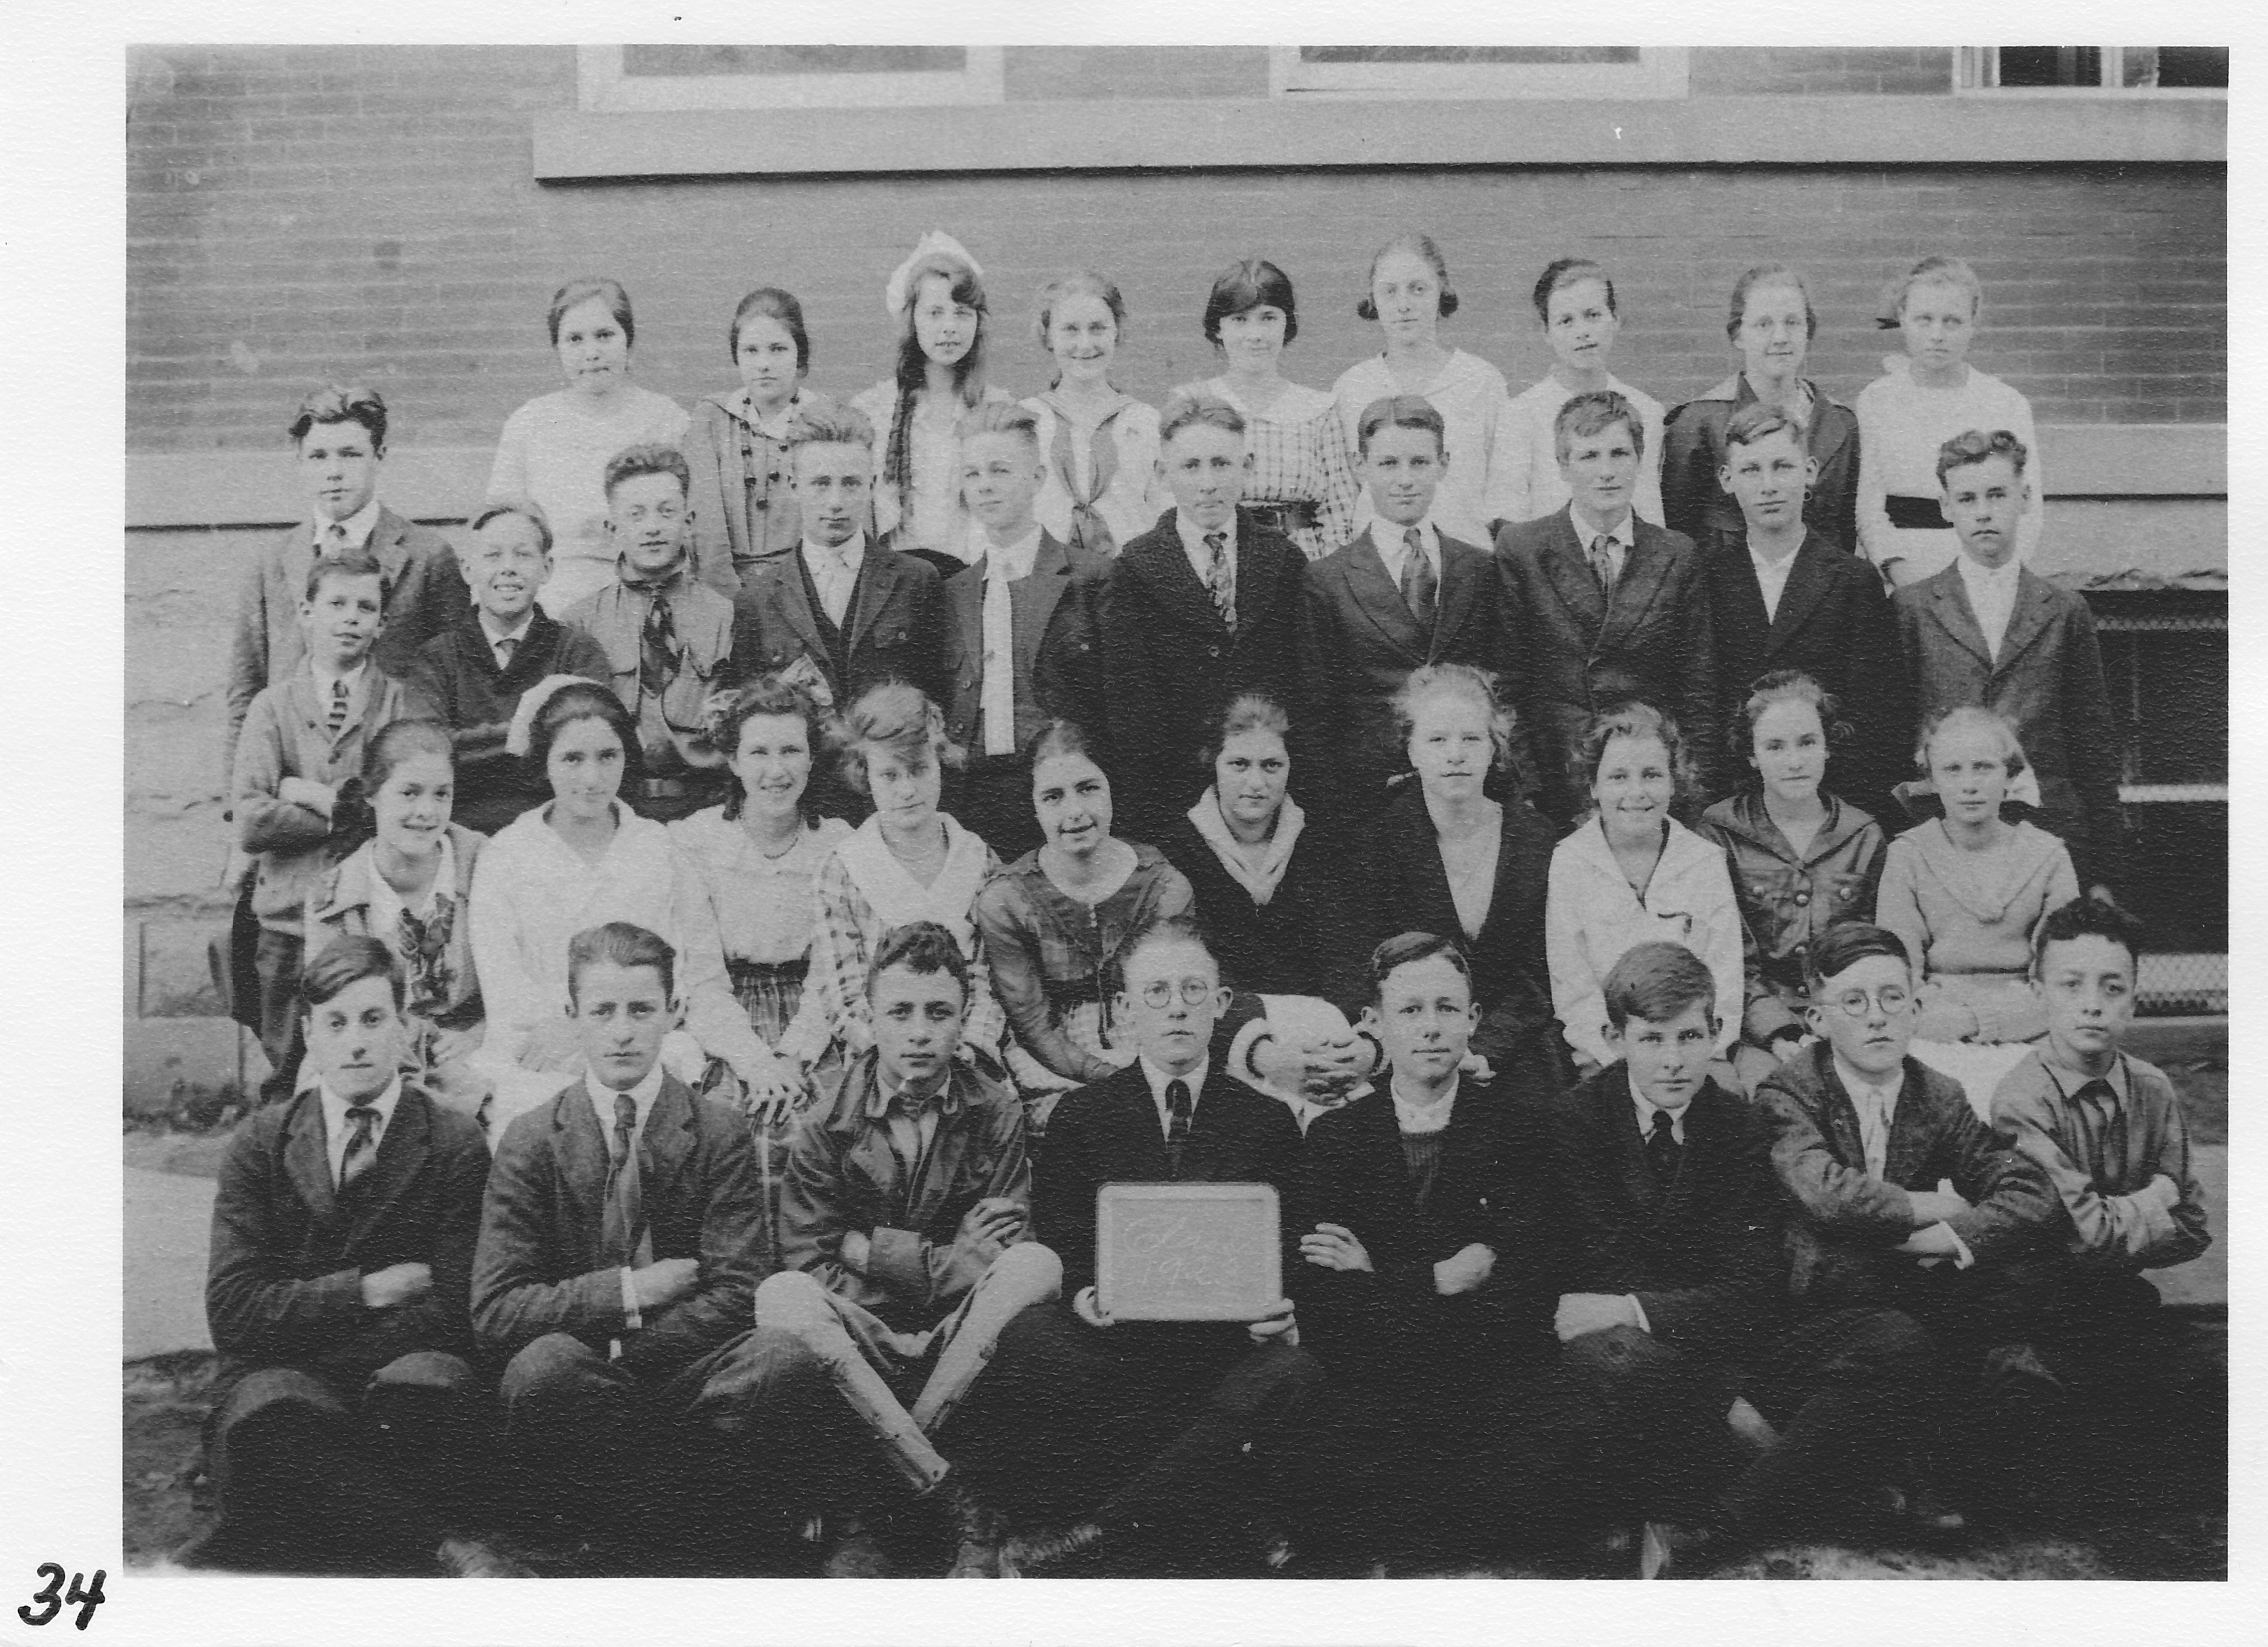 Morenci High School Class of 1923.  Photo taken Oct. 7, 1919 as “Freshman”.  1st left, top row,  Alberta Hoffman.      4th from left, 3rd row,  Ewart “Nim” Blair.    4th from right, 3rd row, Delbert Cottrell.    5th from left, 2nd row, Velma Ruth Clark.    2nd from right, 2nd row,  Leota Ashley.    1st from right, front row, Kenwood Morningstar. 3rd from  right, front row, Maxwell Smith.